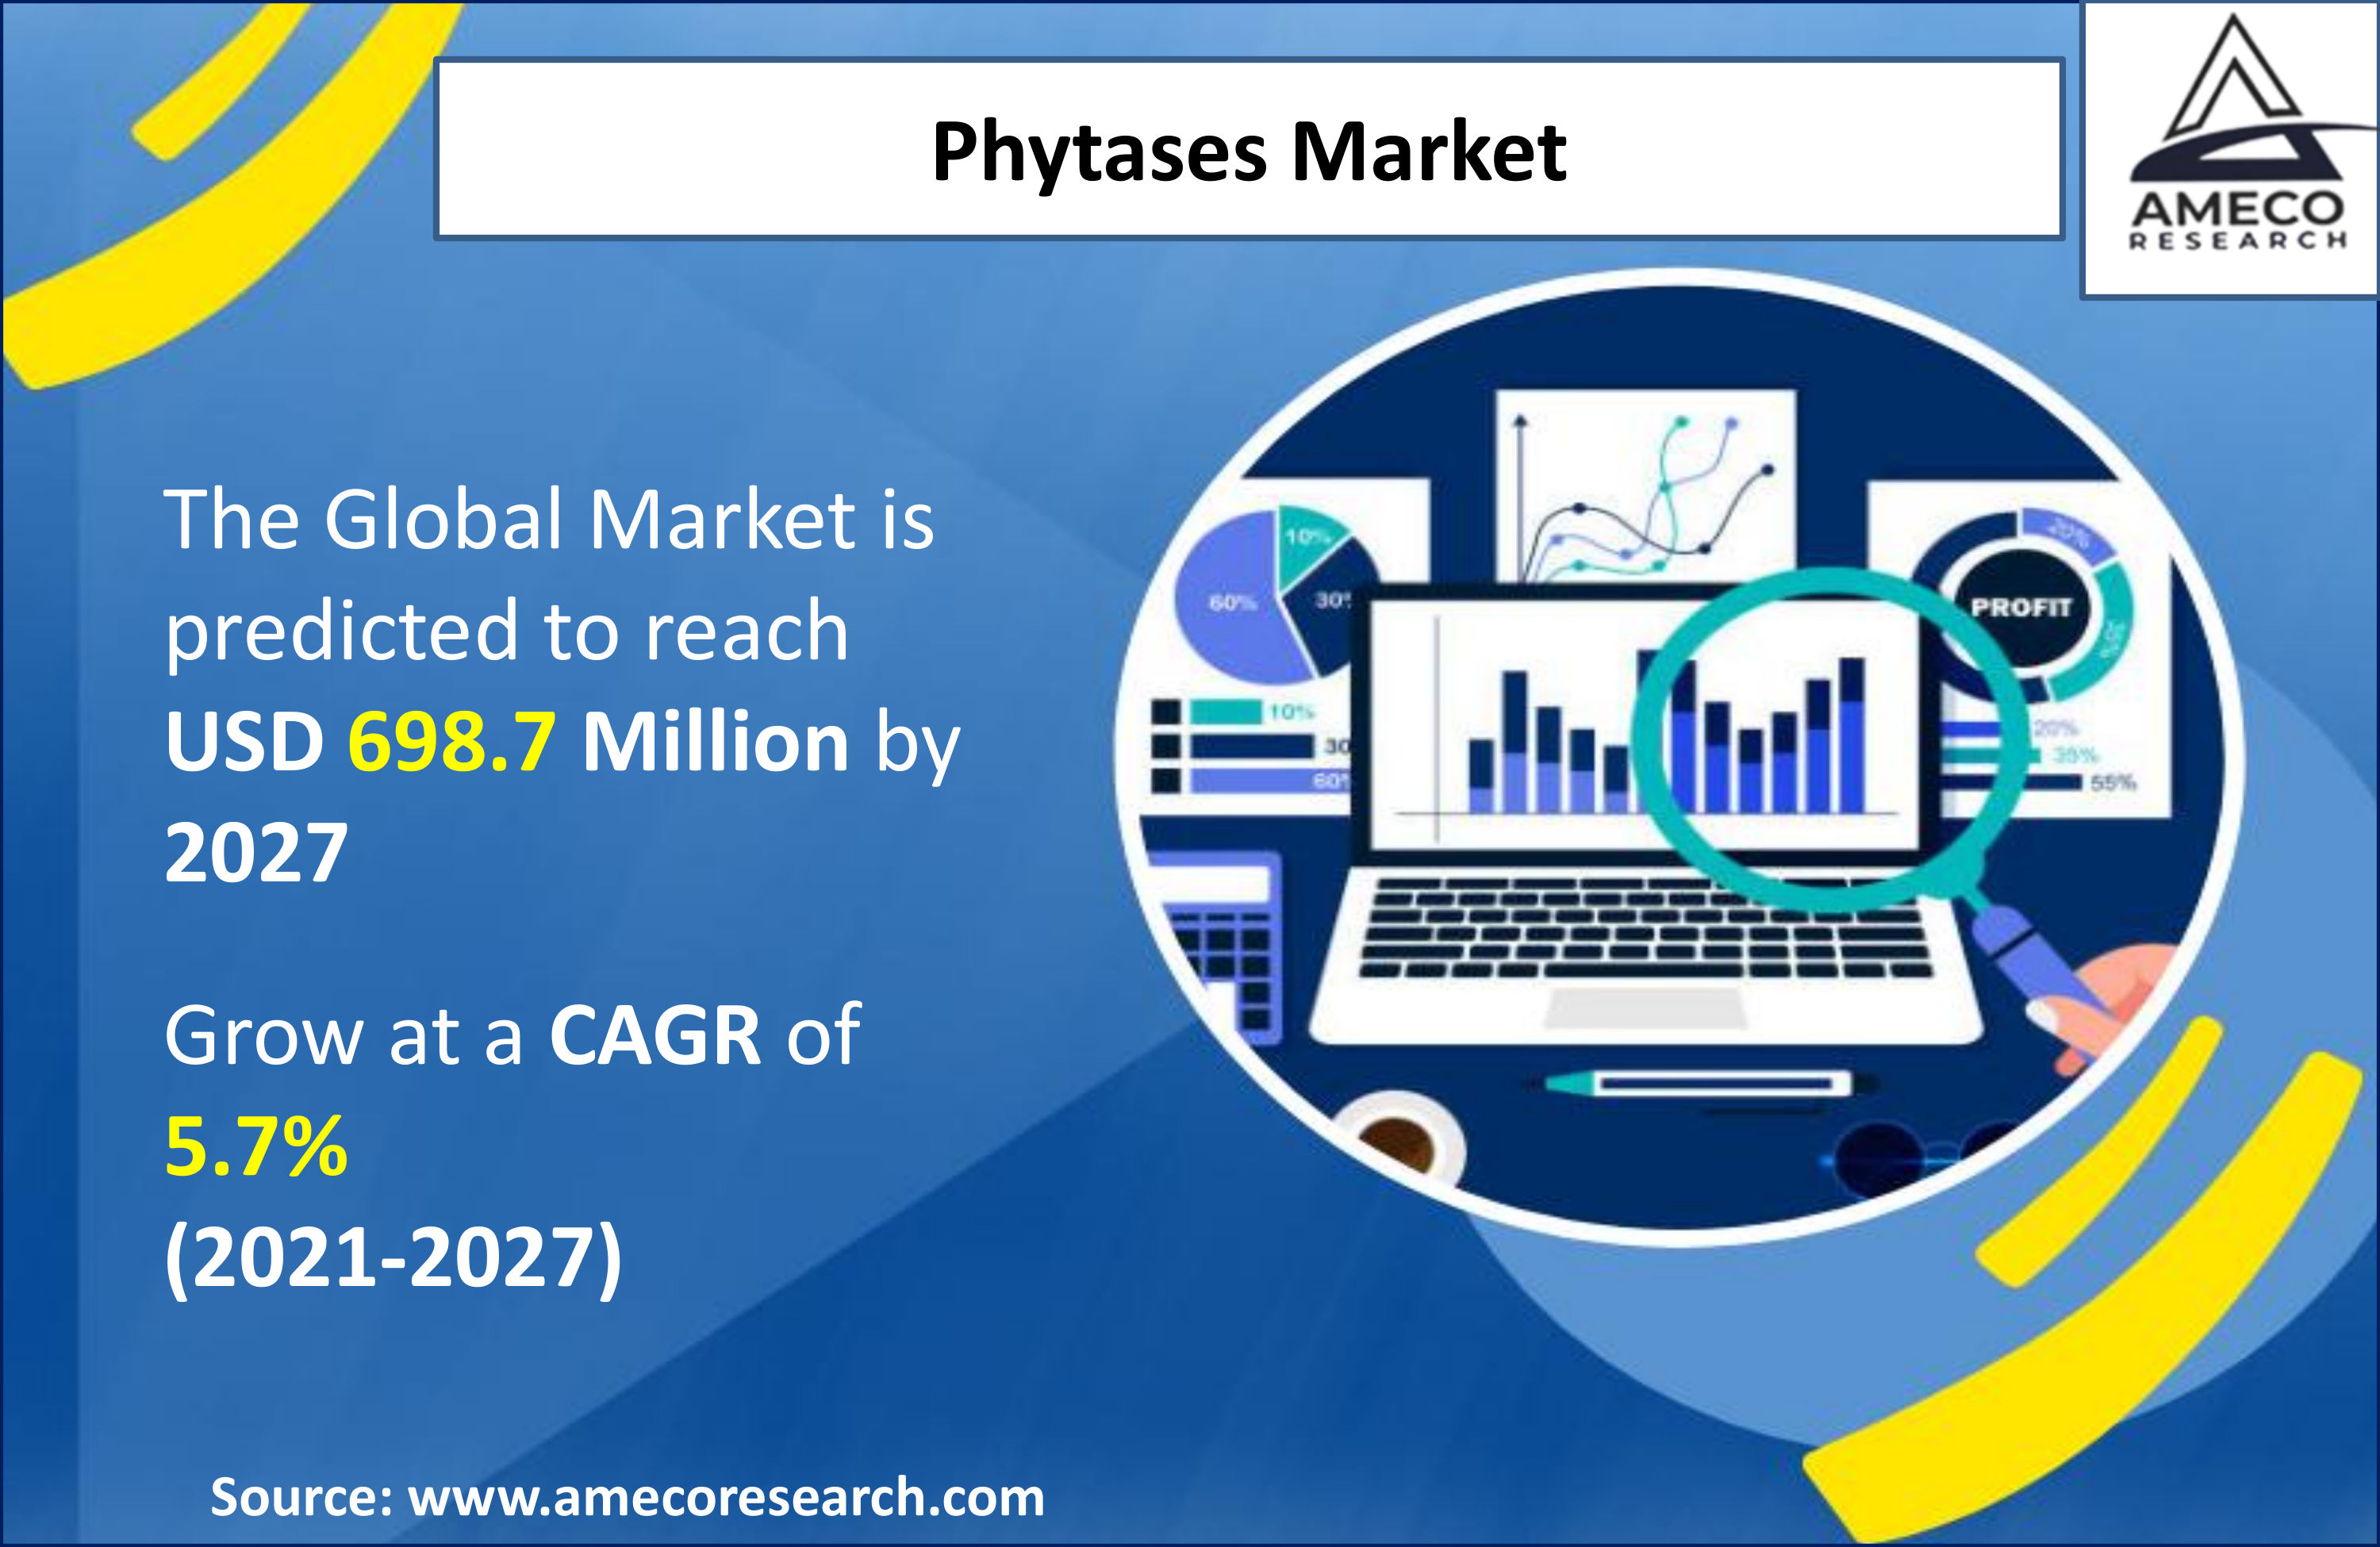 Phytases Market